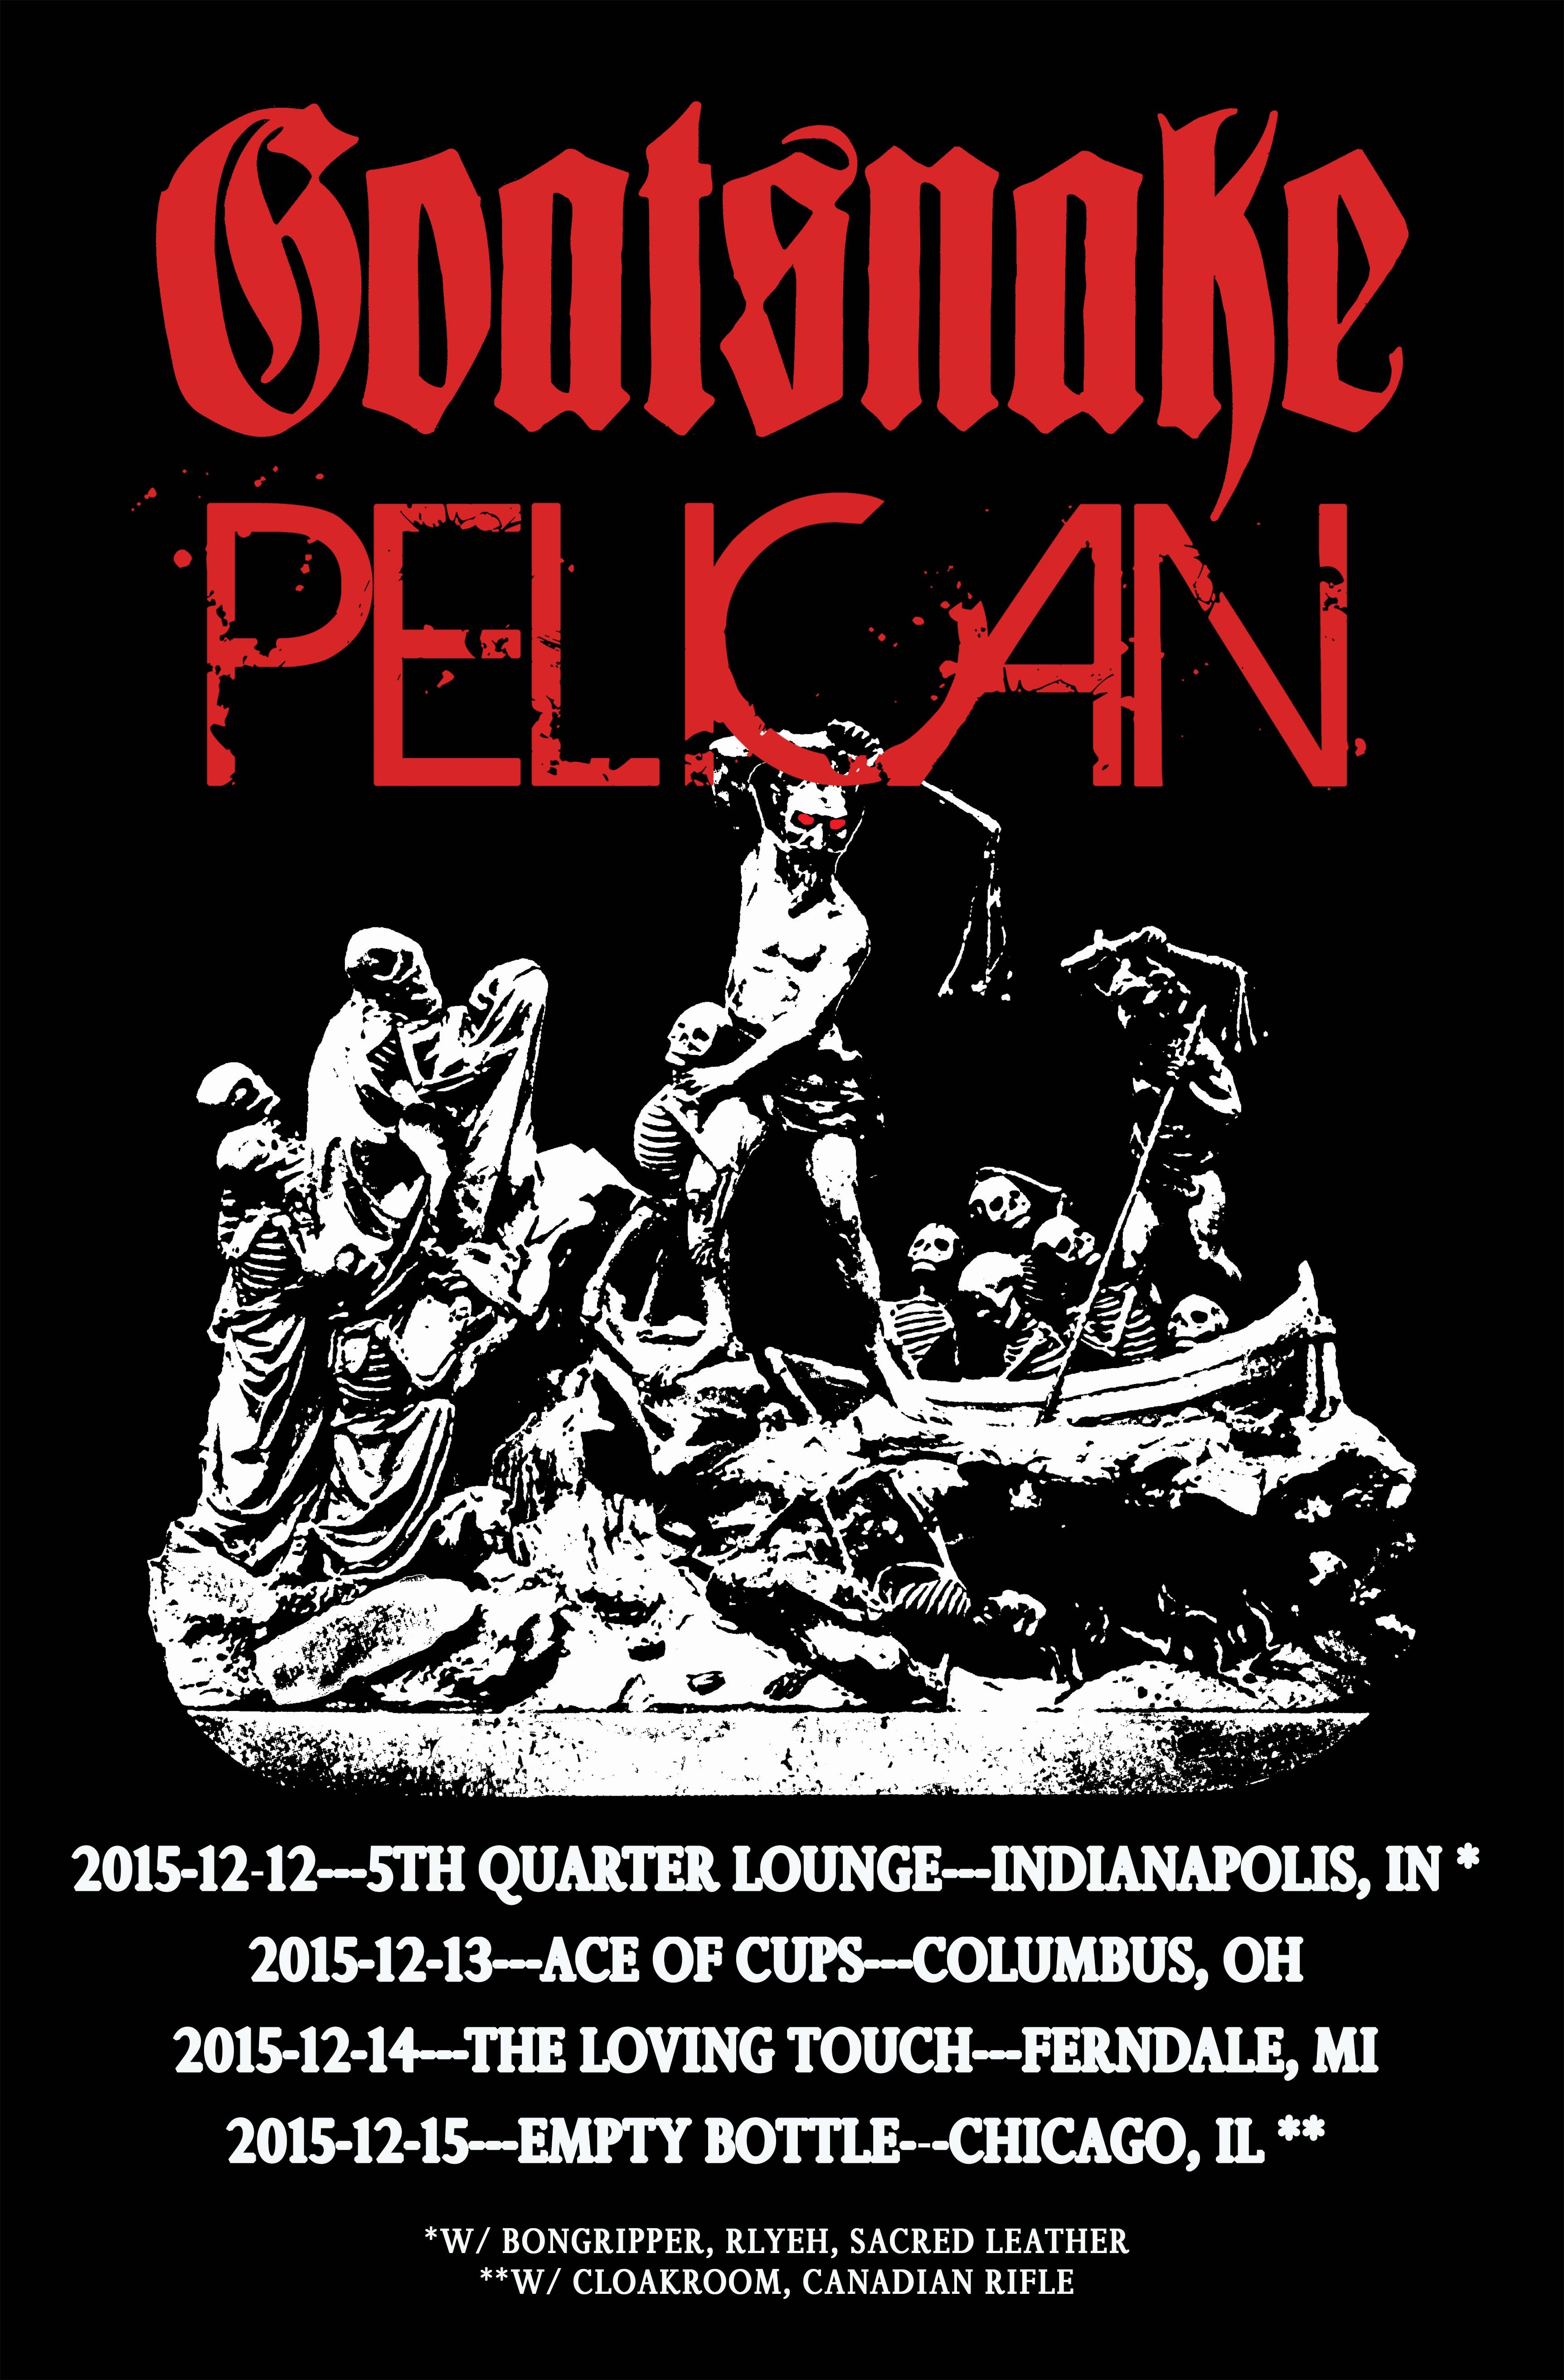 Goatsnake -Pelican Midwest poster